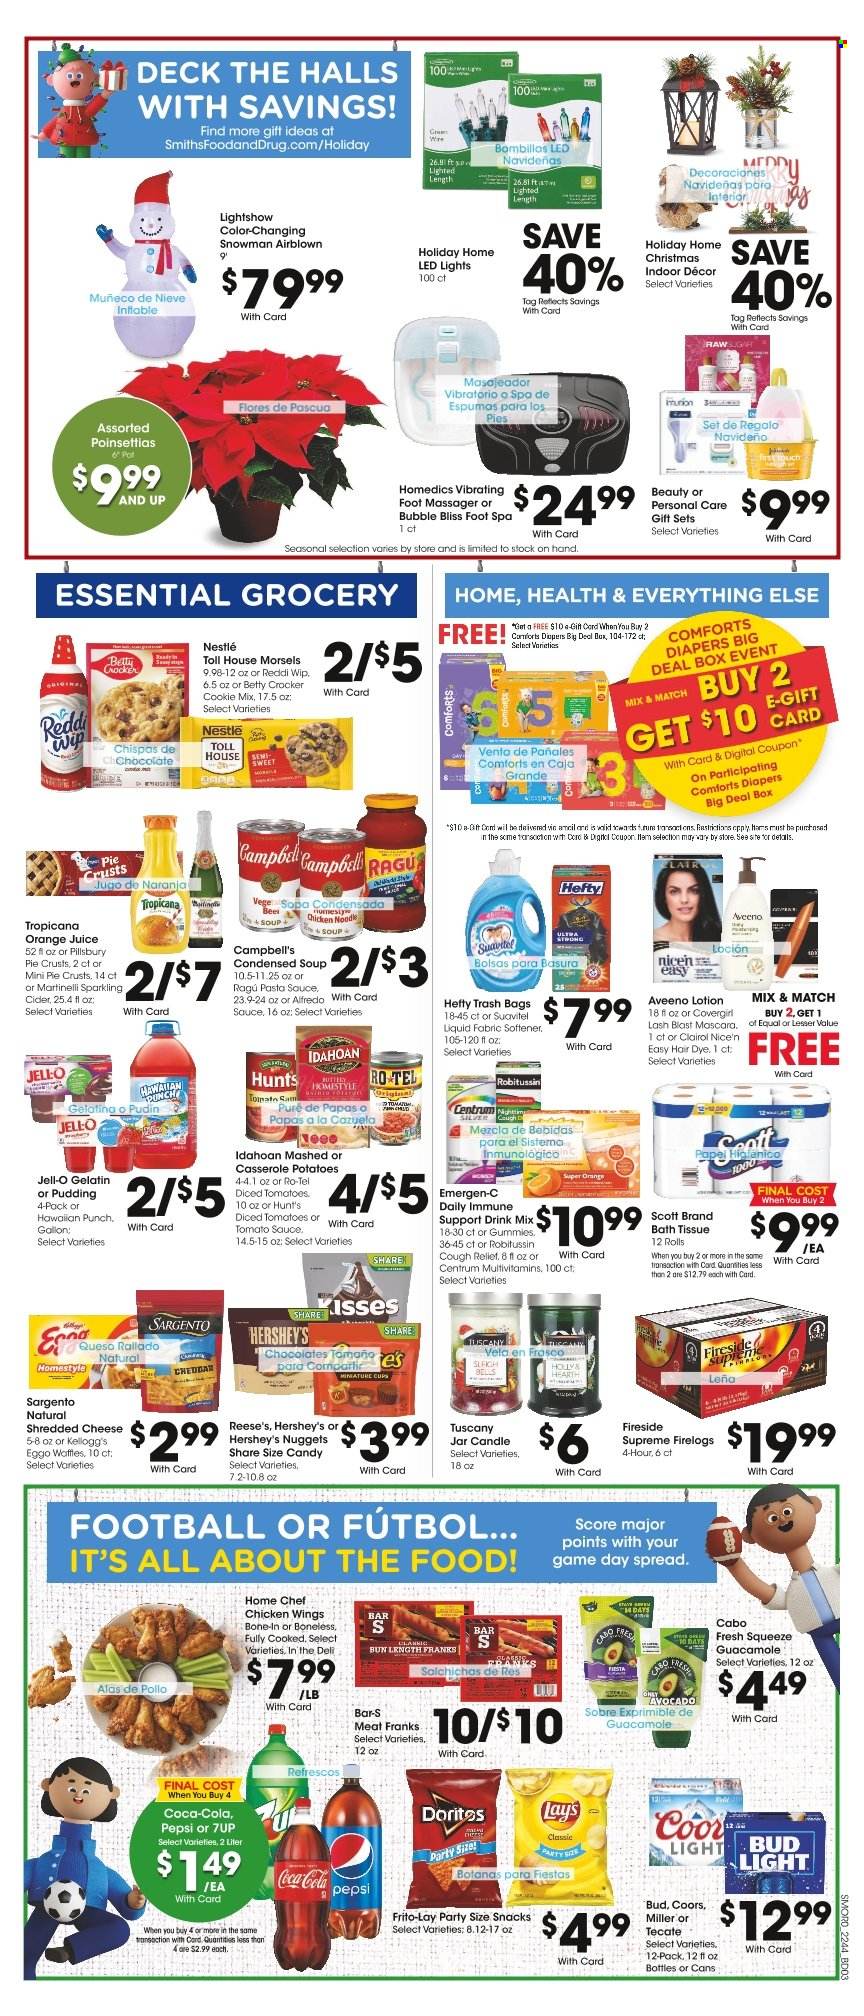 thumbnail - Smith's Flyer - 11/30/2022 - 12/06/2022 - Sales products - pie, waffles, tomatoes, Campbell's, pasta sauce, condensed soup, soup, nuggets, Pillsbury, noodles cup, noodles, instant soup, ragú pasta, guacamole, shredded cheese, cheddar, Sargento, pudding, Reese's, Hershey's, chicken wings, Nestlé, Halls, chocolate, snack, Kellogg's, Doritos, Frito-Lay, pie crust, Jell-O, tomato sauce, diced tomatoes, ragu, Coca-Cola, Pepsi, orange juice, juice, 7UP, sparkling cider, sparkling wine, cider, beer, Bud Light, Miller, nappies, Aveeno, bath tissue, Scott, fabric softener, Clairol, body lotion, Hefty, trash bags, mascara, pot, casserole, cup, candle, multivitamin, Robitussin, Emergen-C, Centrum, Coors. Page 6.